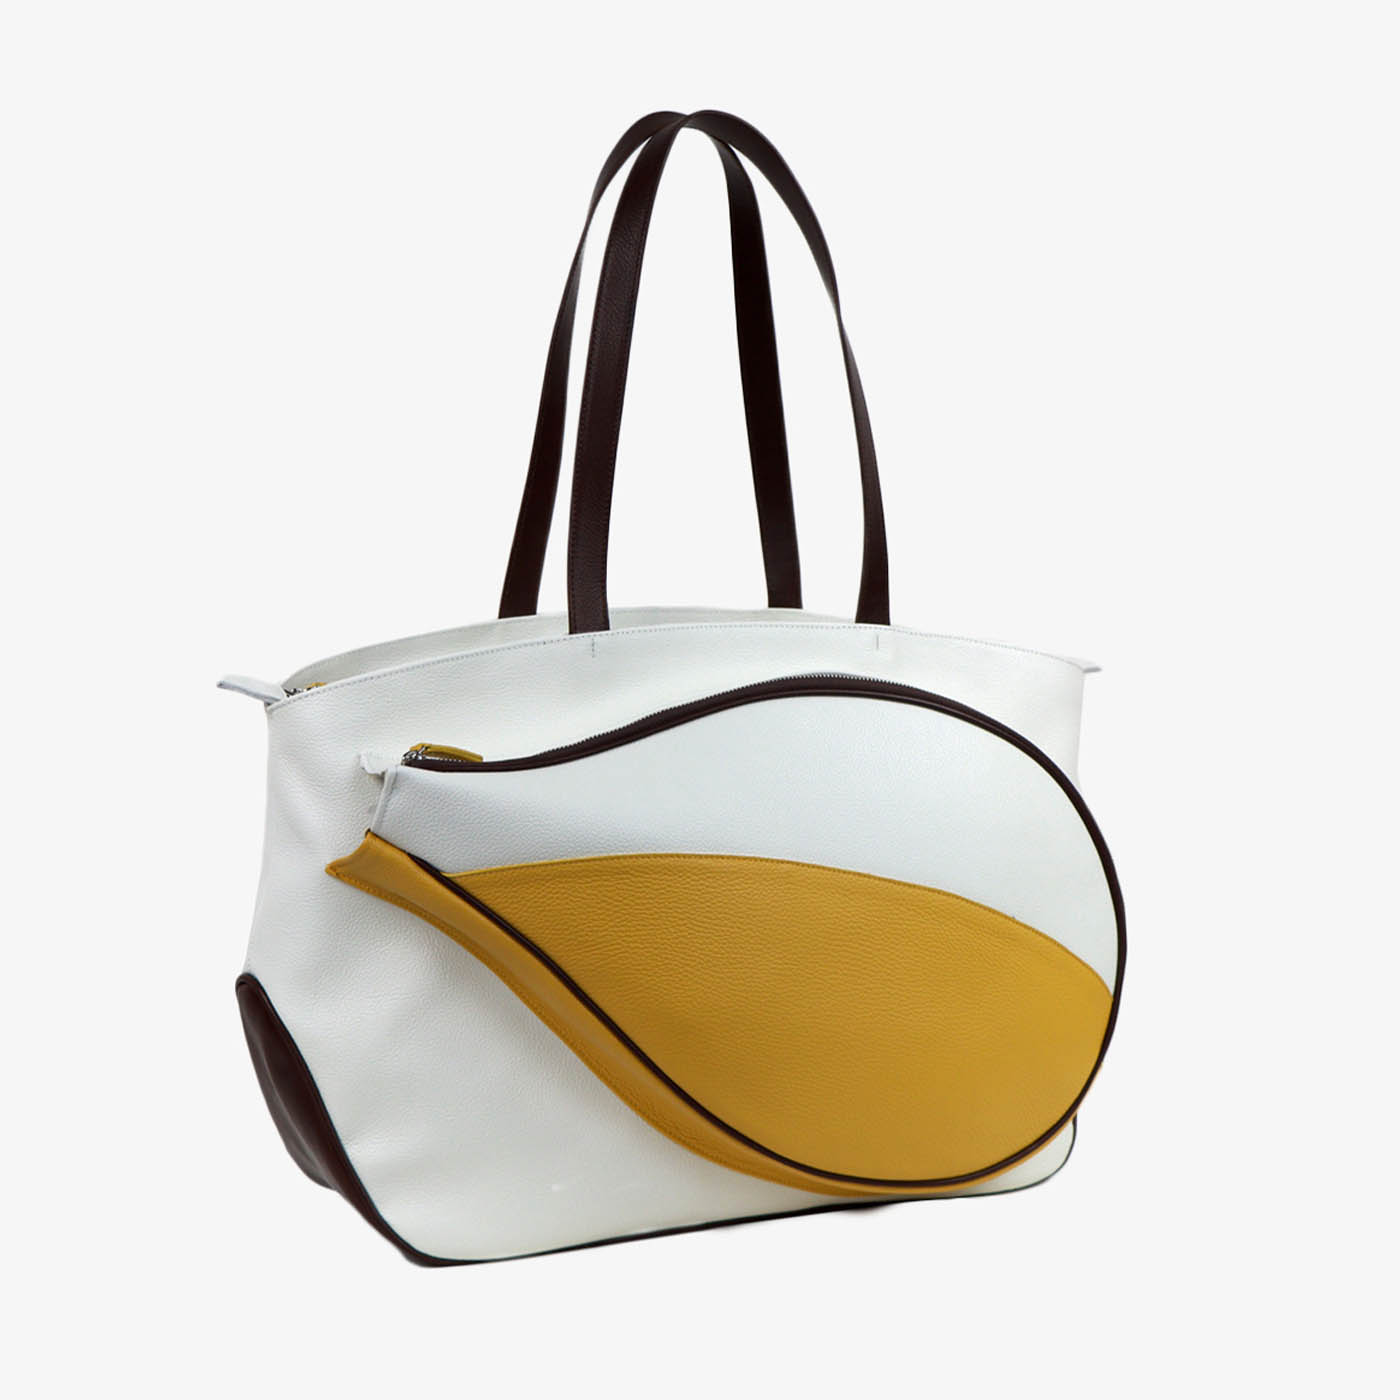 Sport White/Yellow/Brown Bag with Tennis-Racket-Shaped Pocket - Alternative view 1